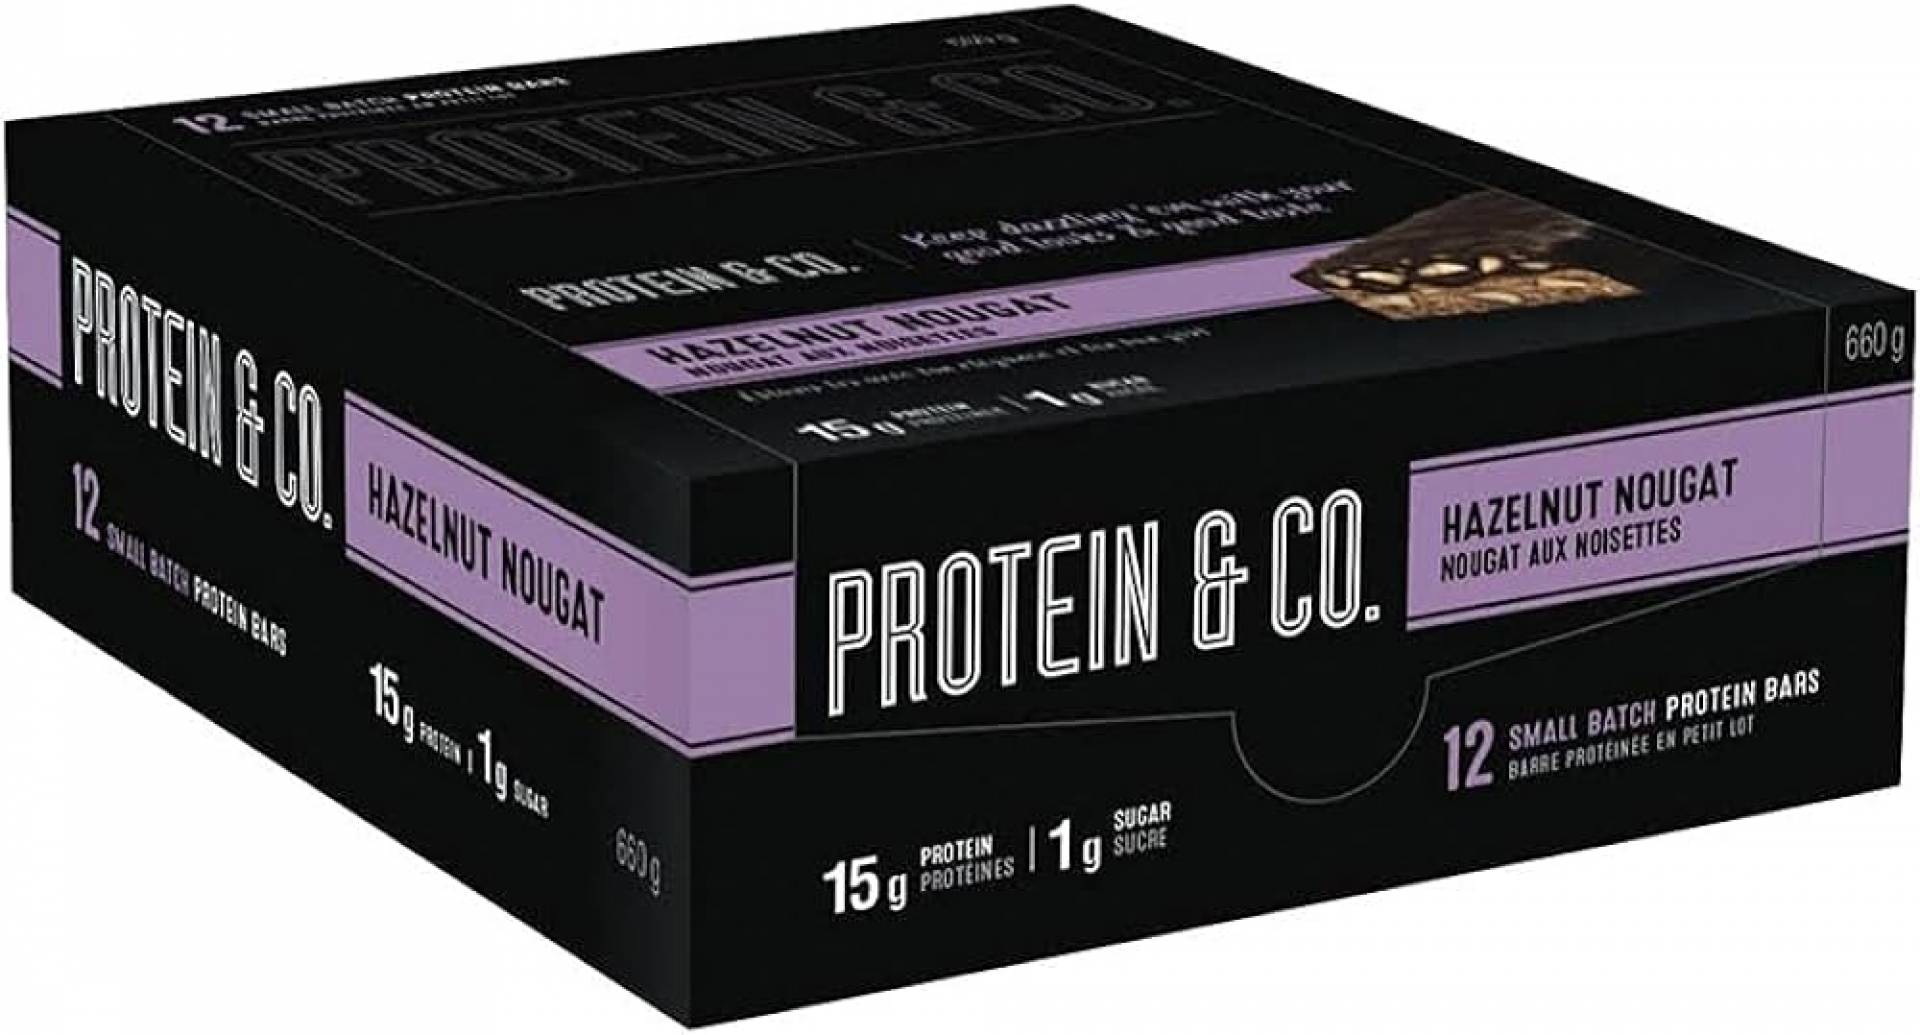 Protein & Co. Protein Bars - $3.99